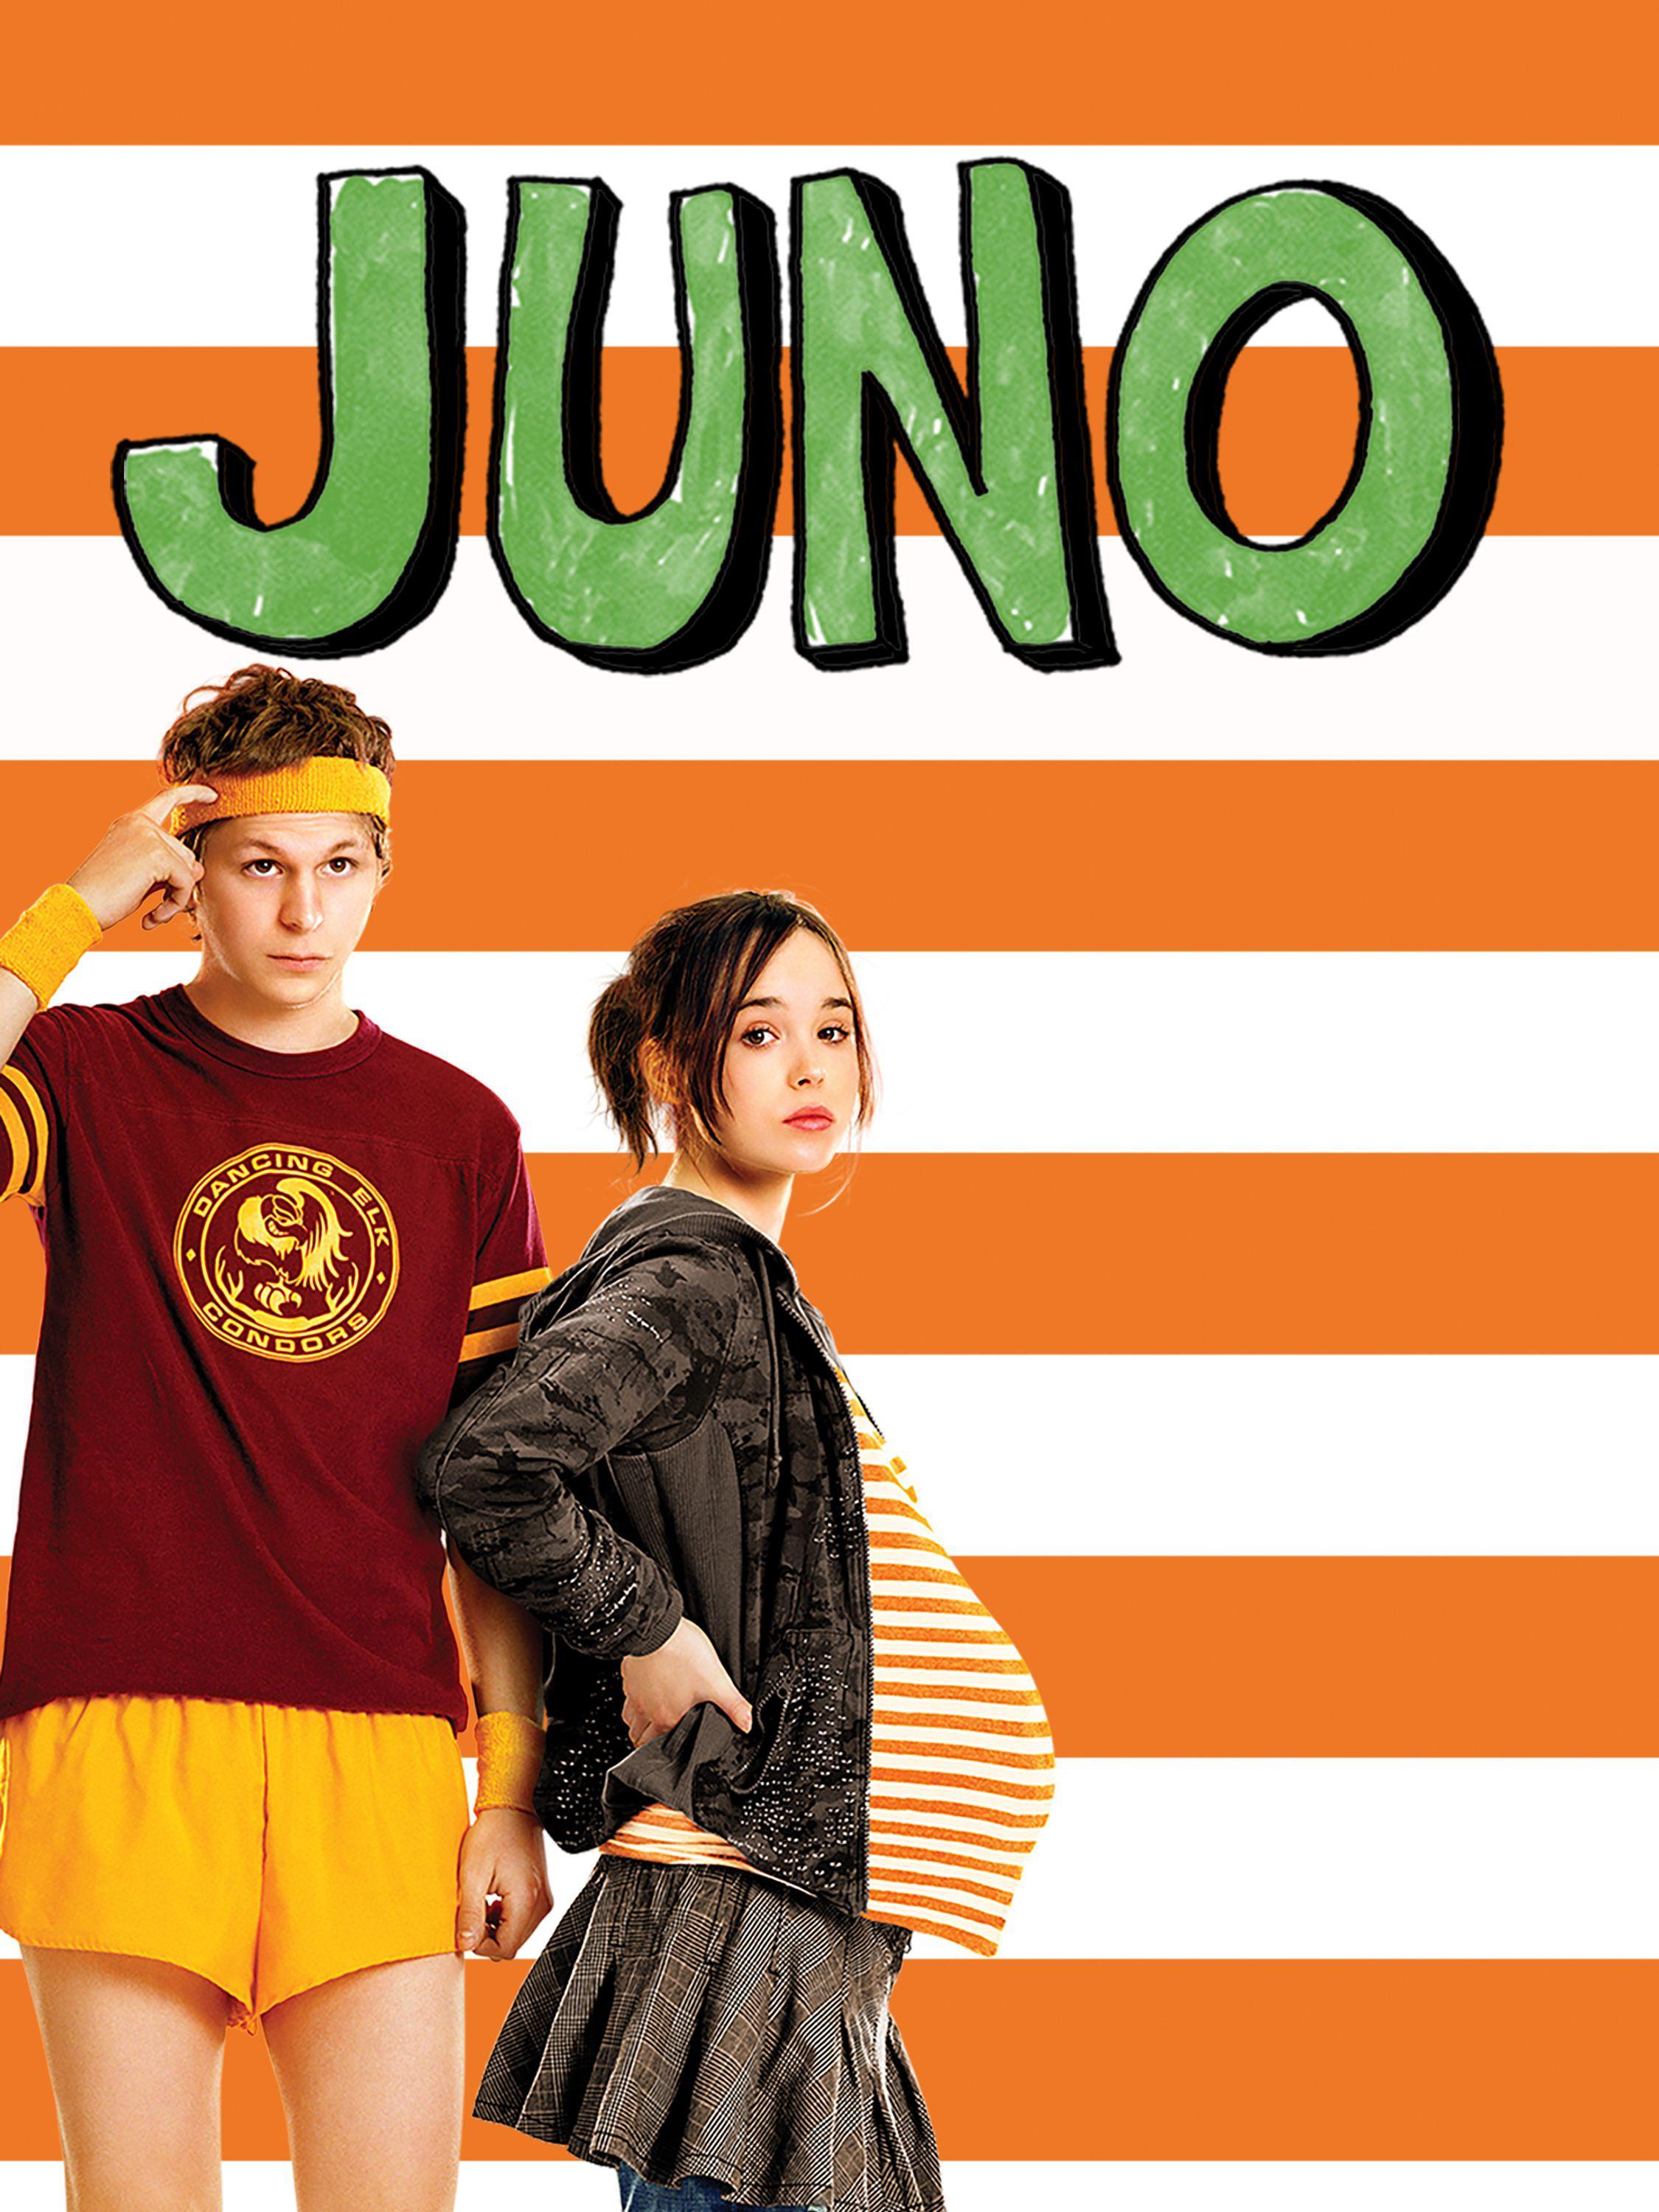 denise houle recommends juno movie free download pic